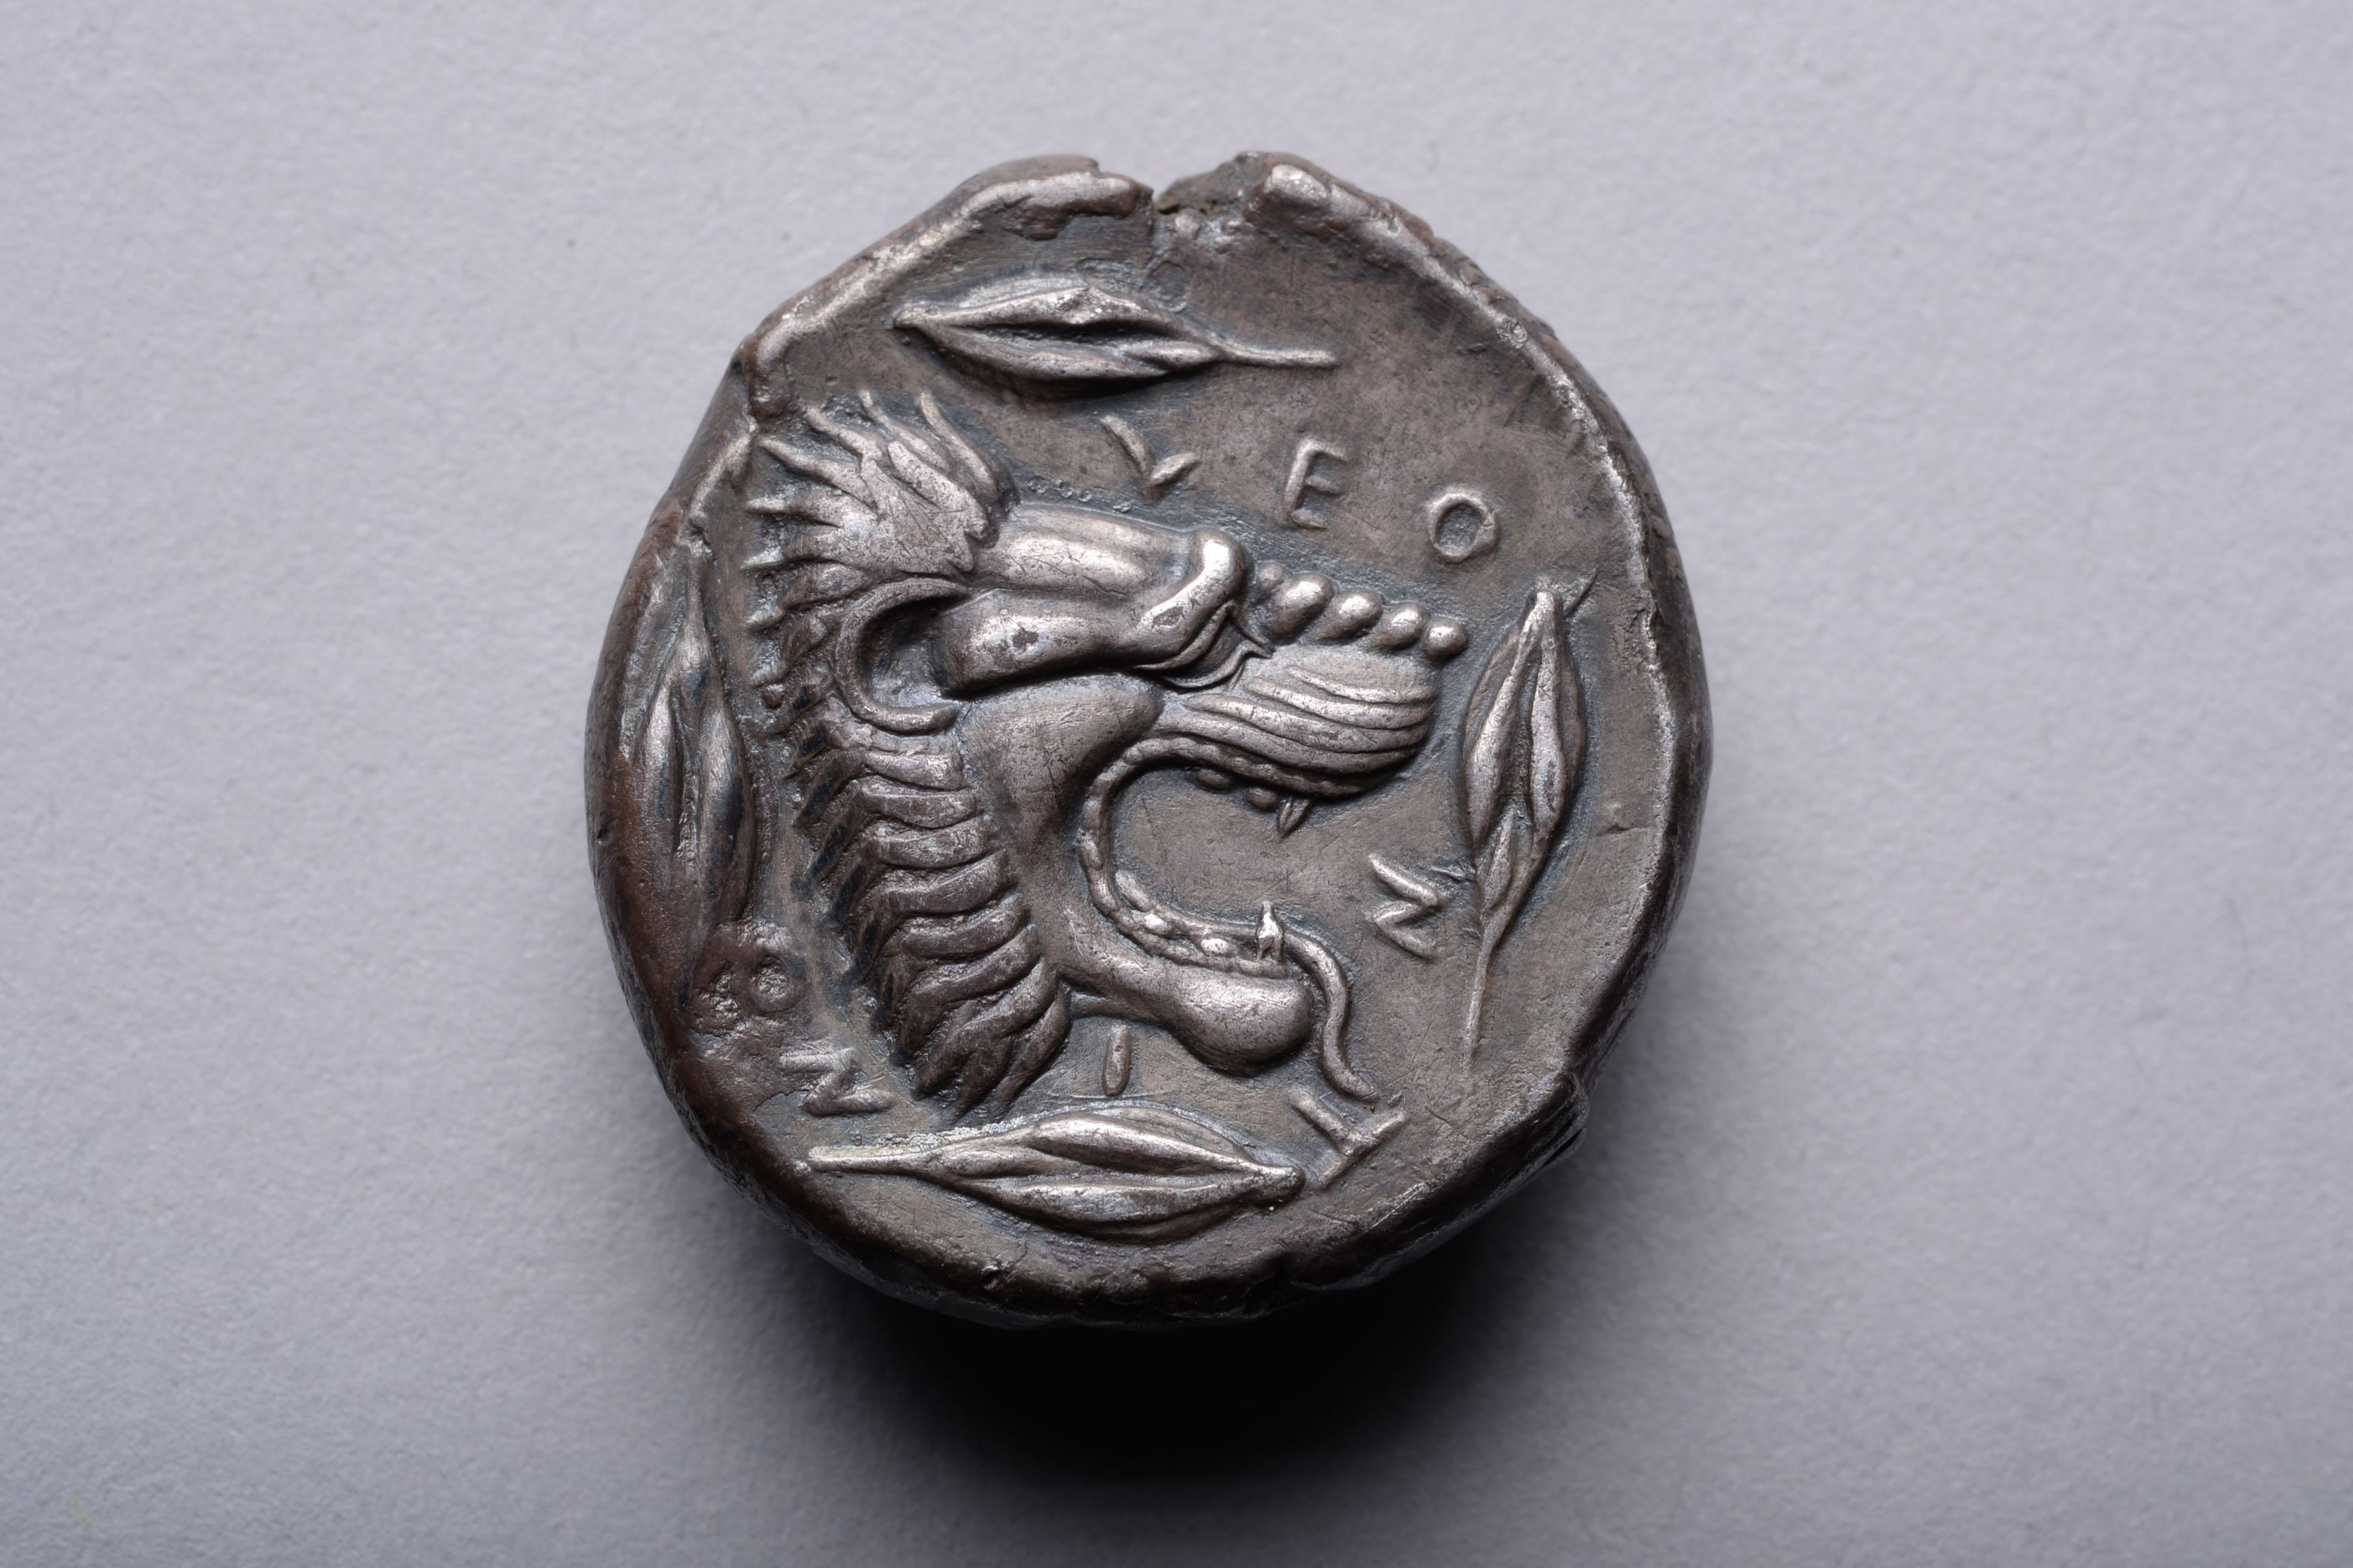 Silver tetradrachm from Leontini, Sicily, circa 450 BC.

The obverse with Apollo, patron deity of Leontini. The god is shown wearing a laurel wreath, his long hair tied into a chignon at the nape of the neck, with loose curls cascading down his